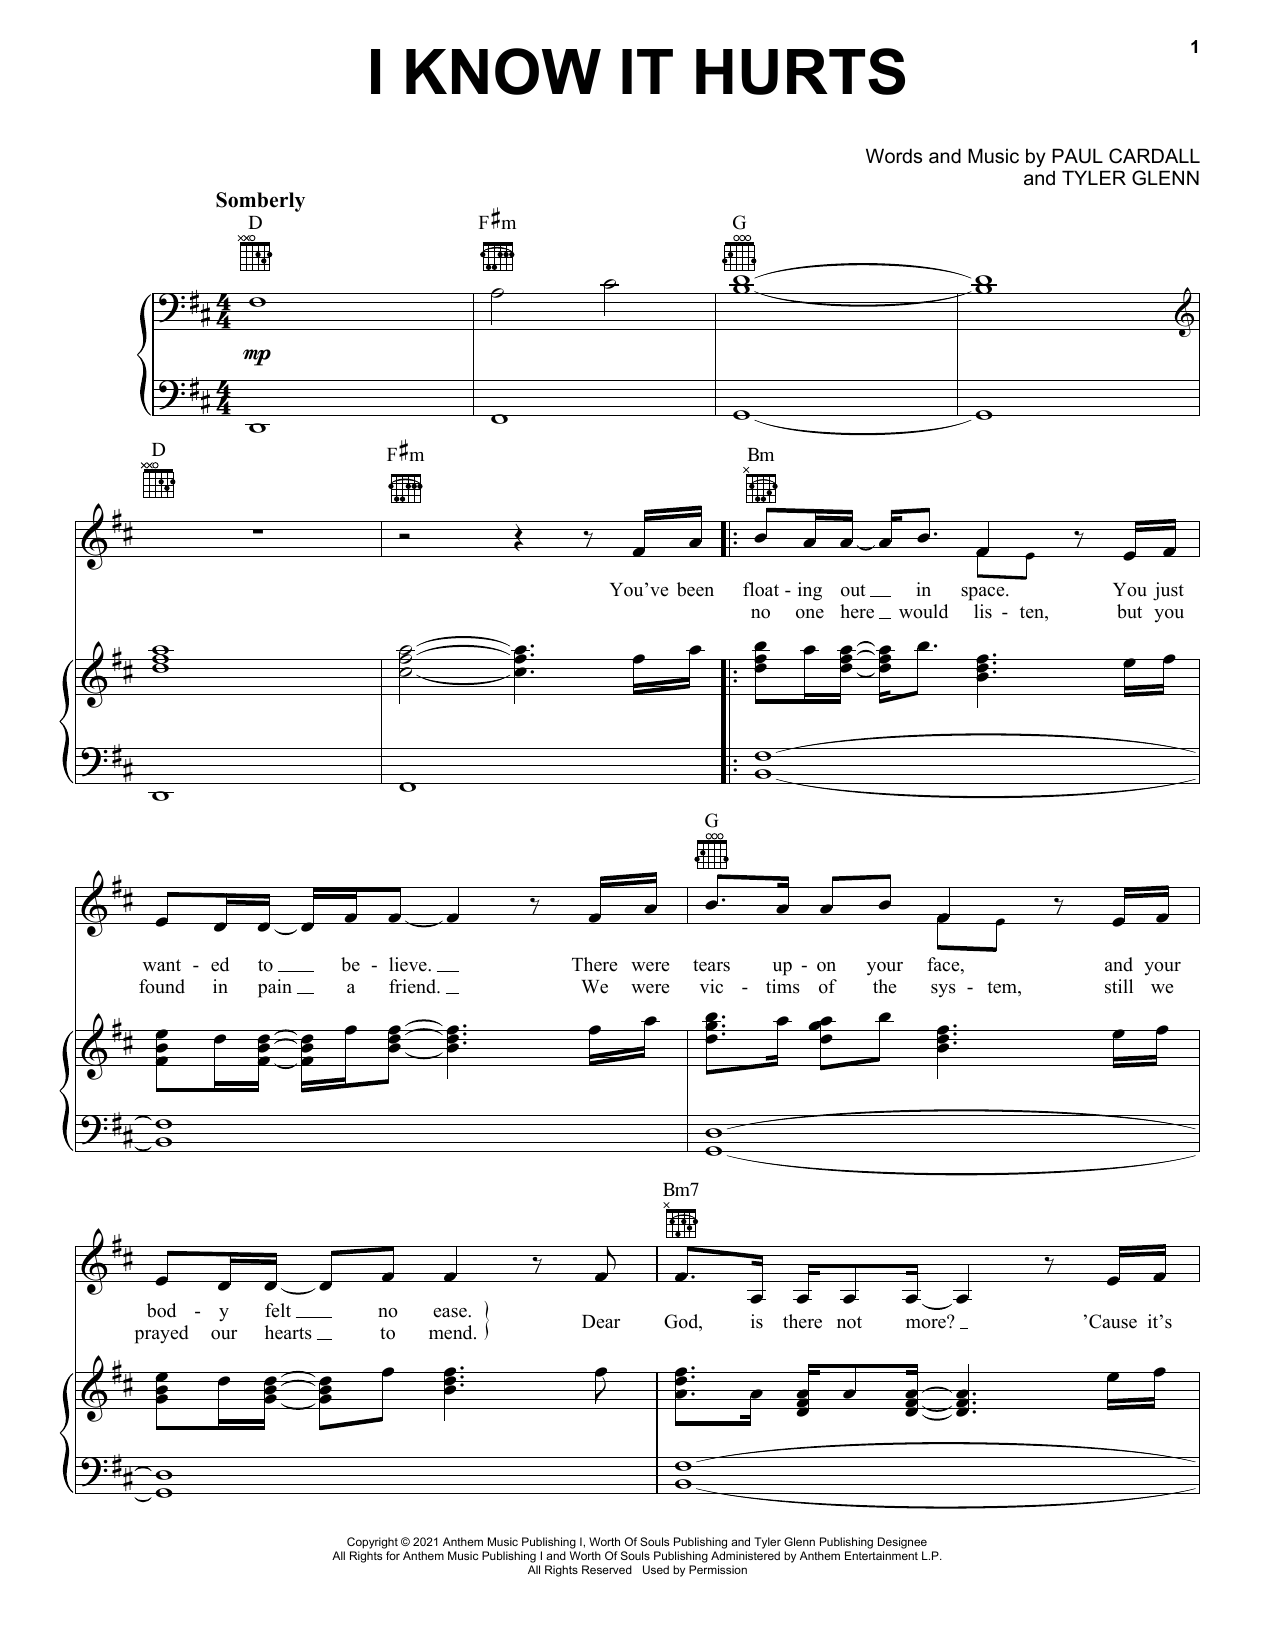 Download Paul Cardall and Tyler Glenn I Know It Hurts Sheet Music